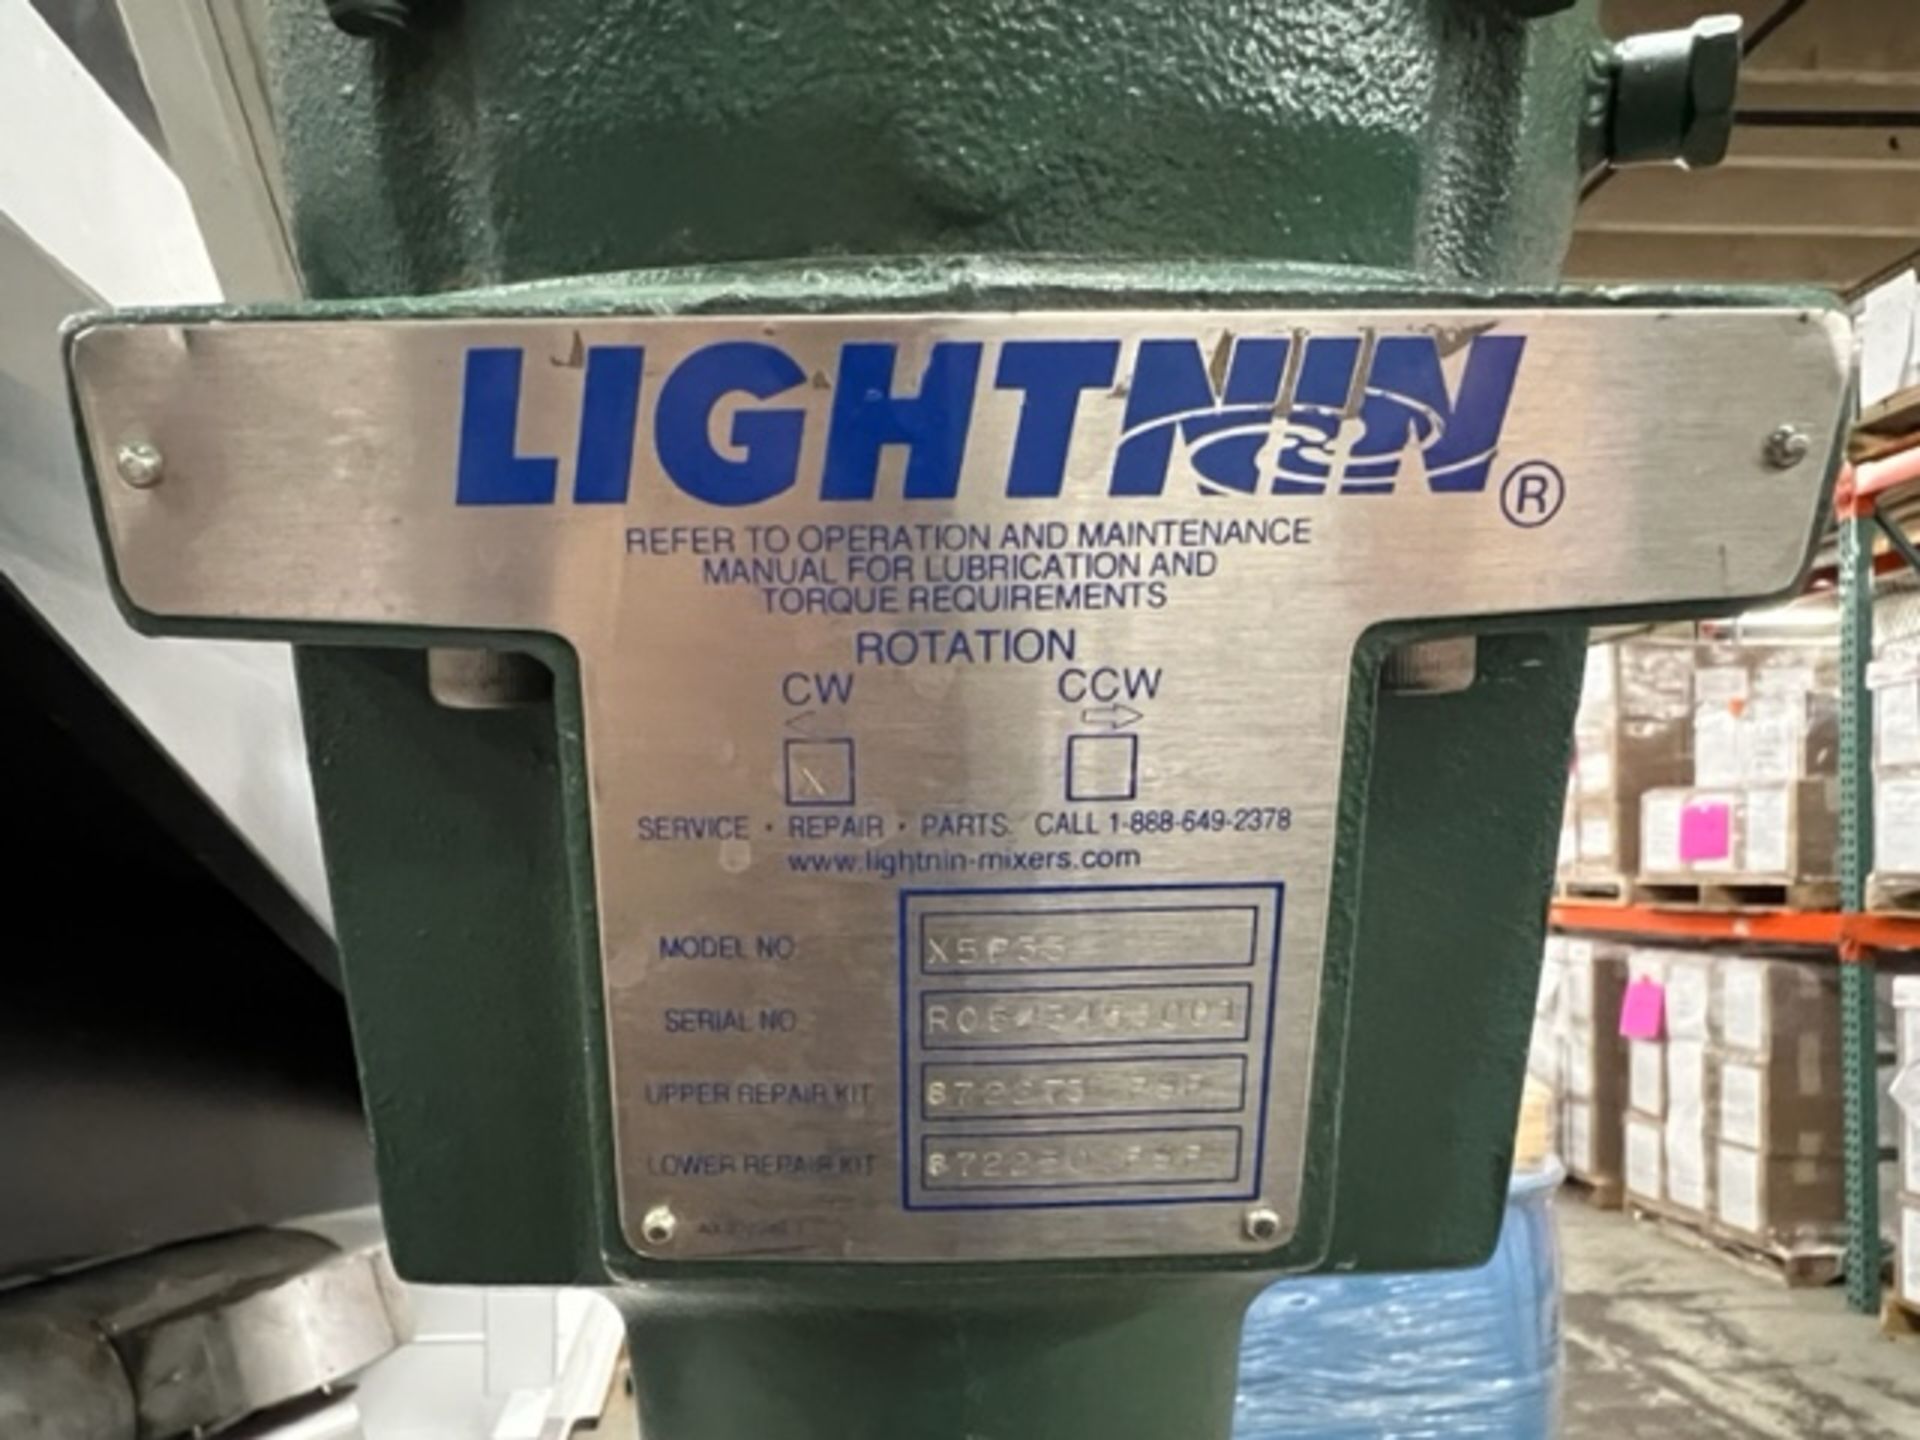 Asset 311- Lightnin X5P33 Portable mixer with 8" diameter propellor driven by 1/2 HP, 230/460 volt - Image 4 of 4